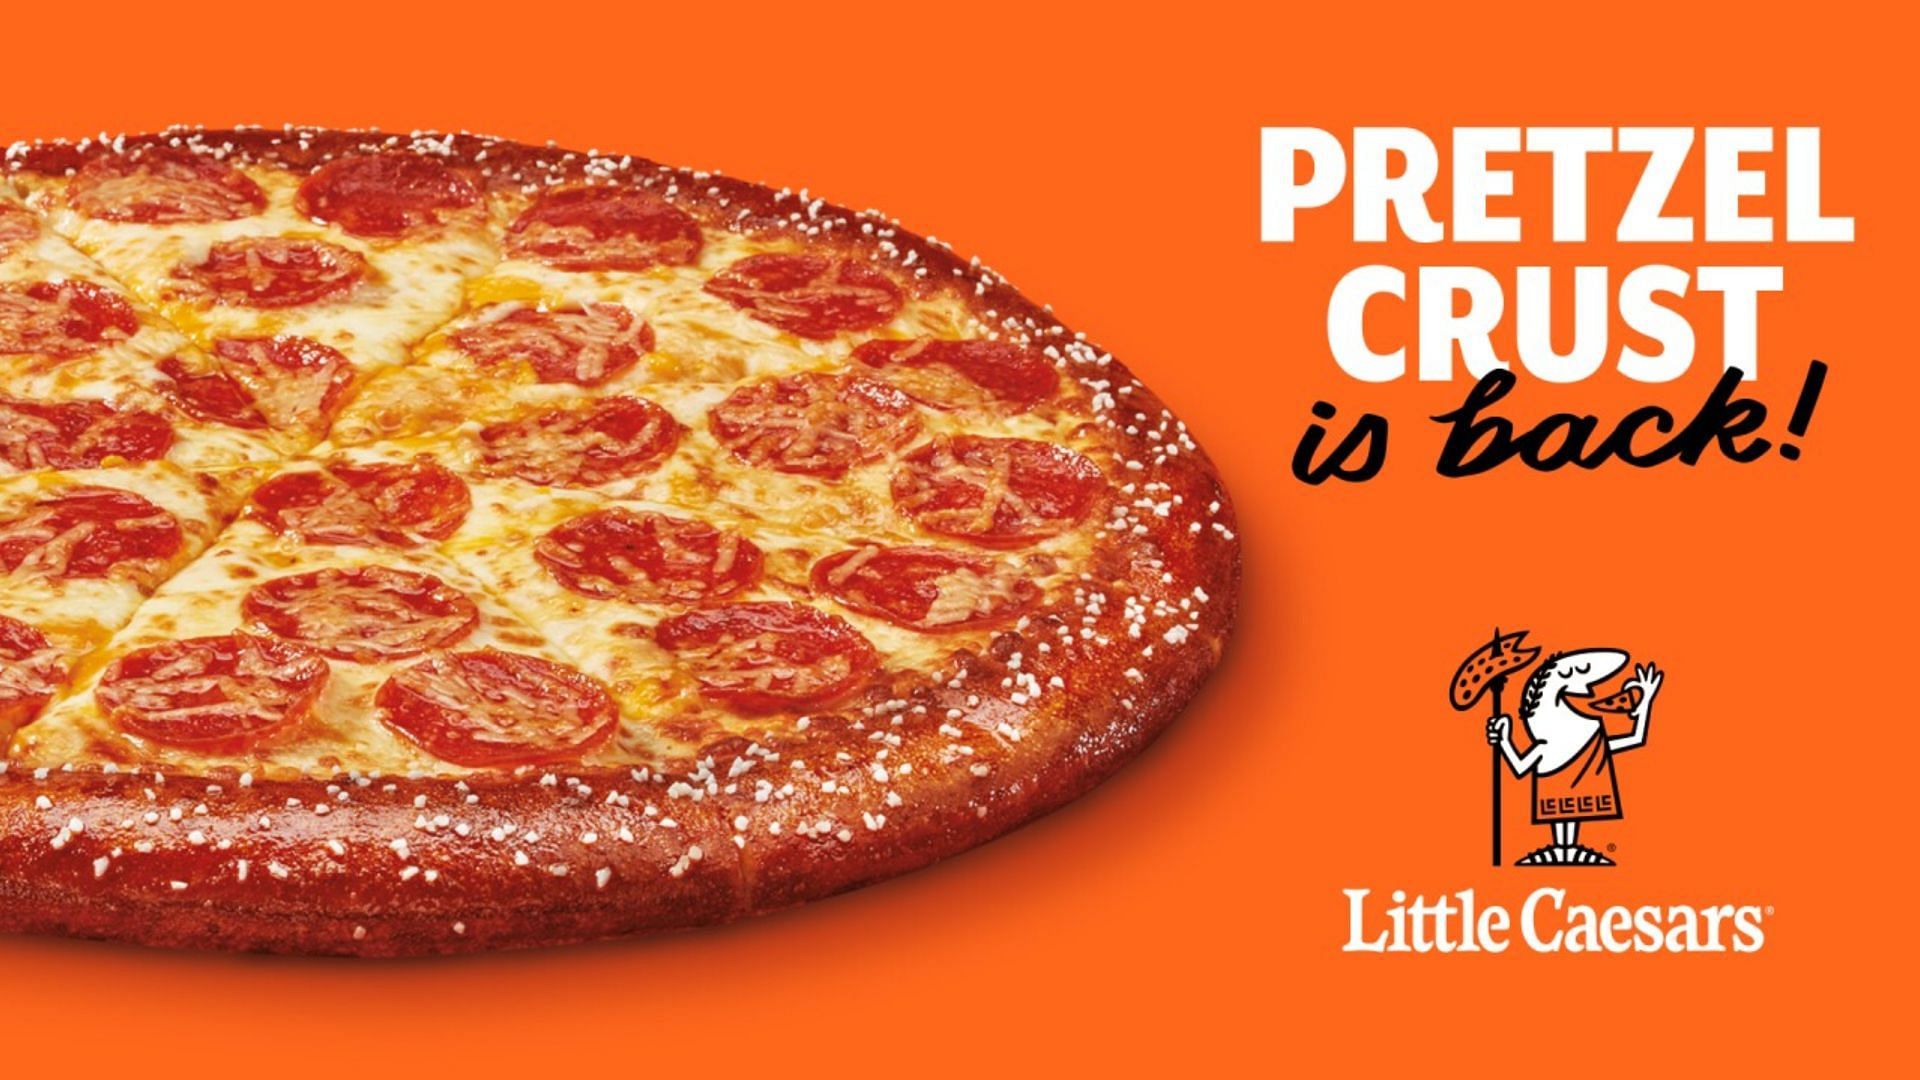 the Pretzel Crust Pizza returns to the chain starting March 27 and will be available across the country for a limited time (Image via Little Caesars)